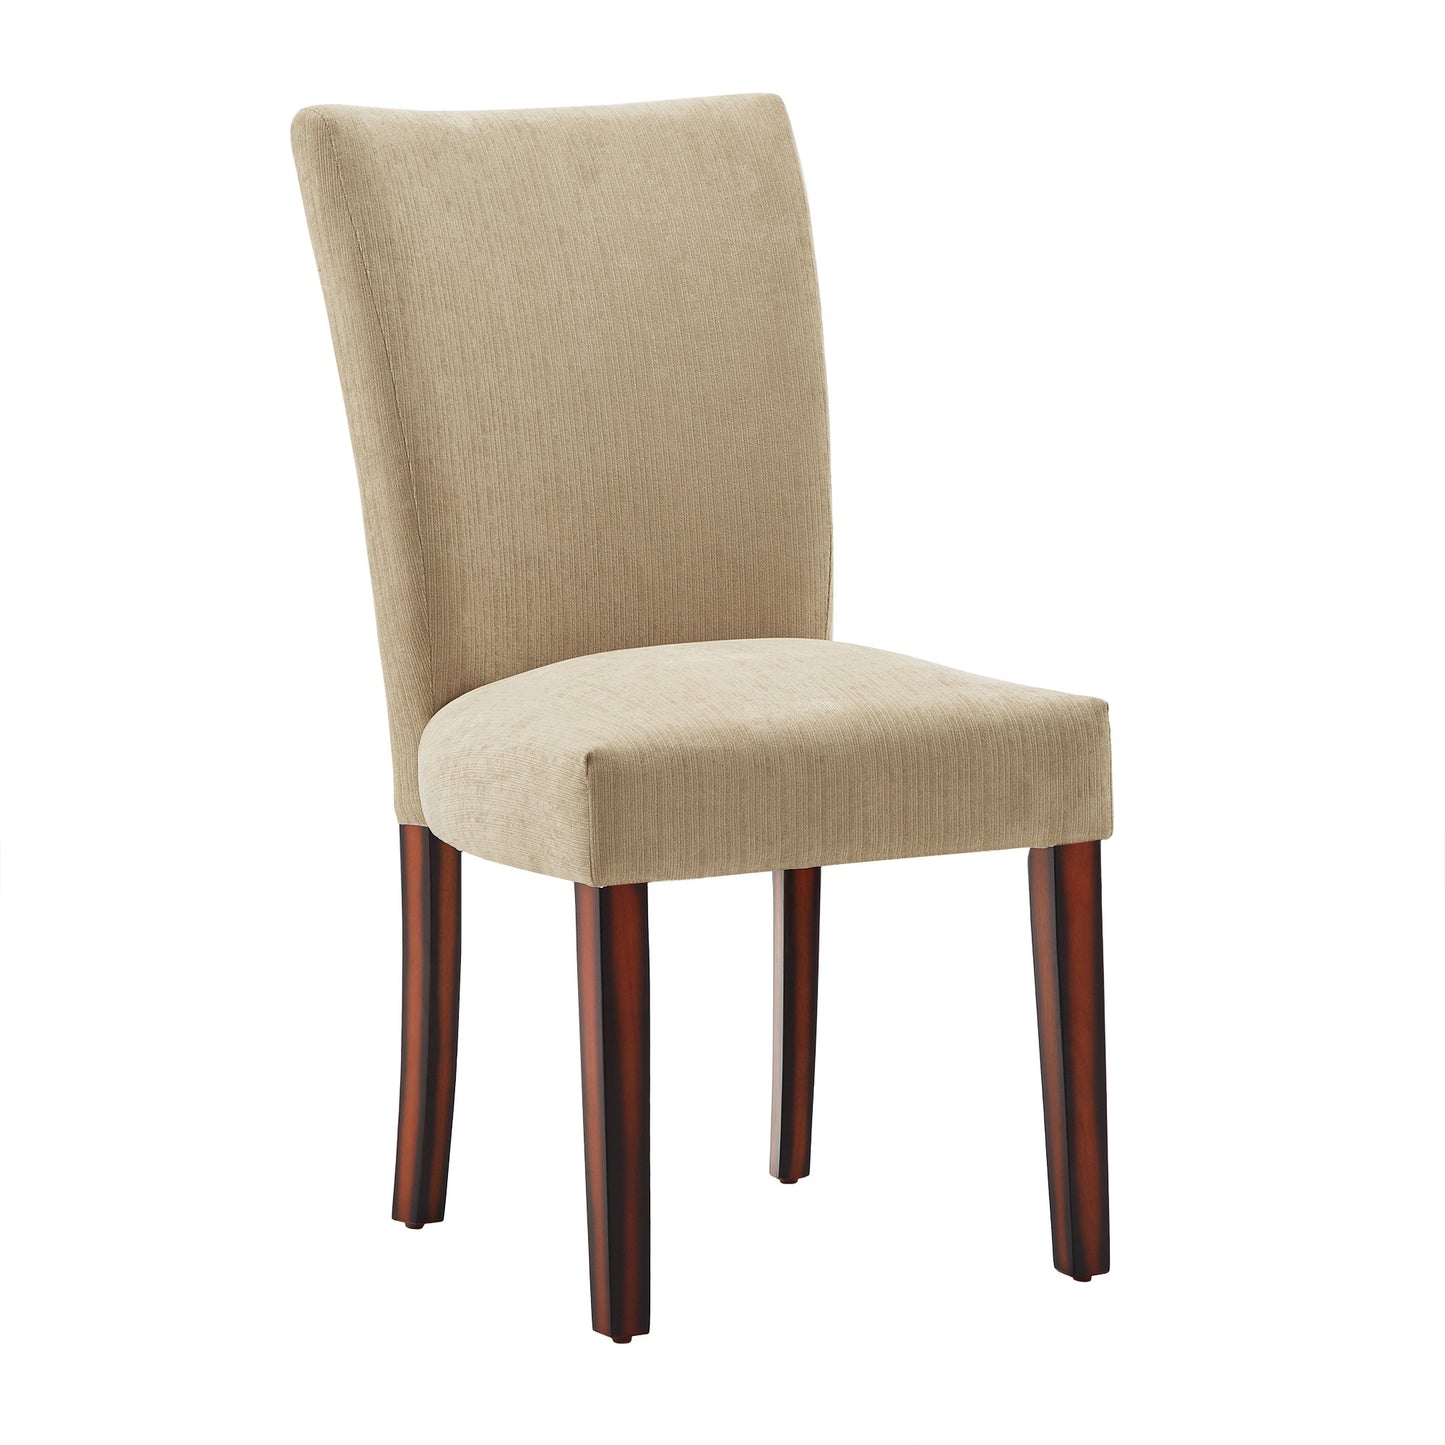 Chenille Parsons Dining Chairs (Set of 2) - Espresso Finish, Camel Chenille